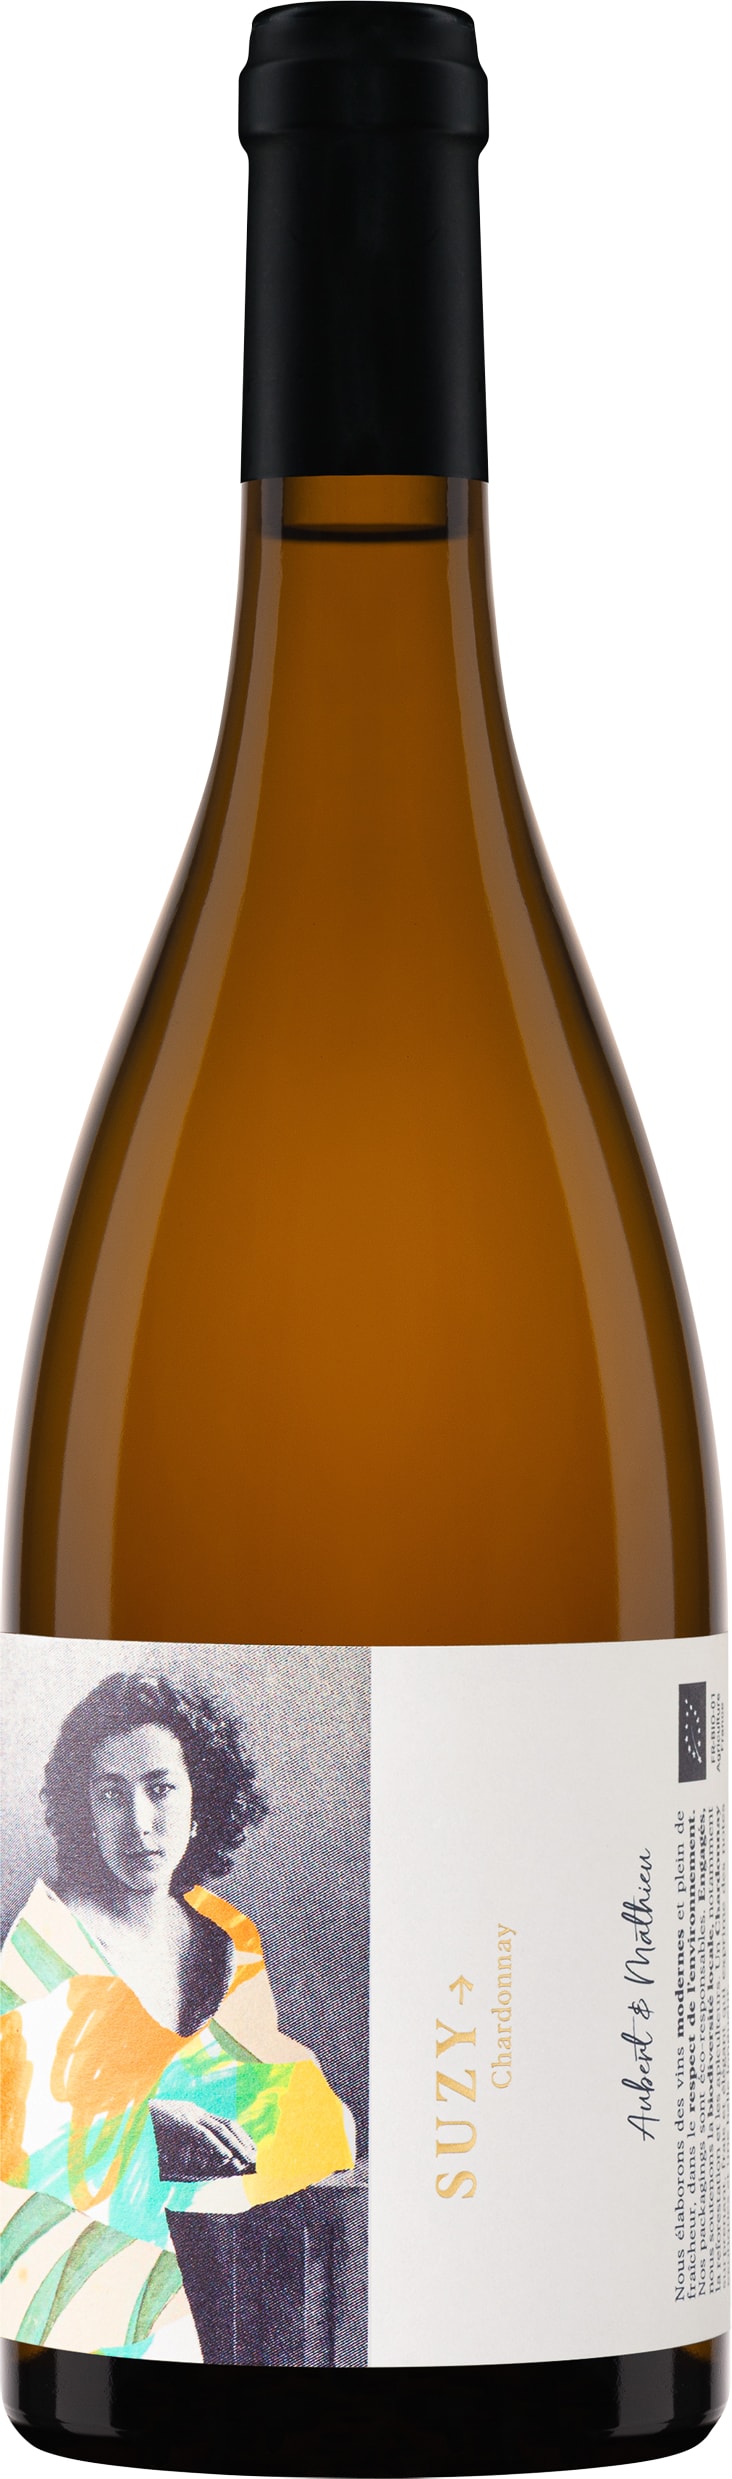 Aubert and Mathieu IGP Oc 2022 75cl - Buy Aubert and Mathieu Wines from GREAT WINES DIRECT wine shop